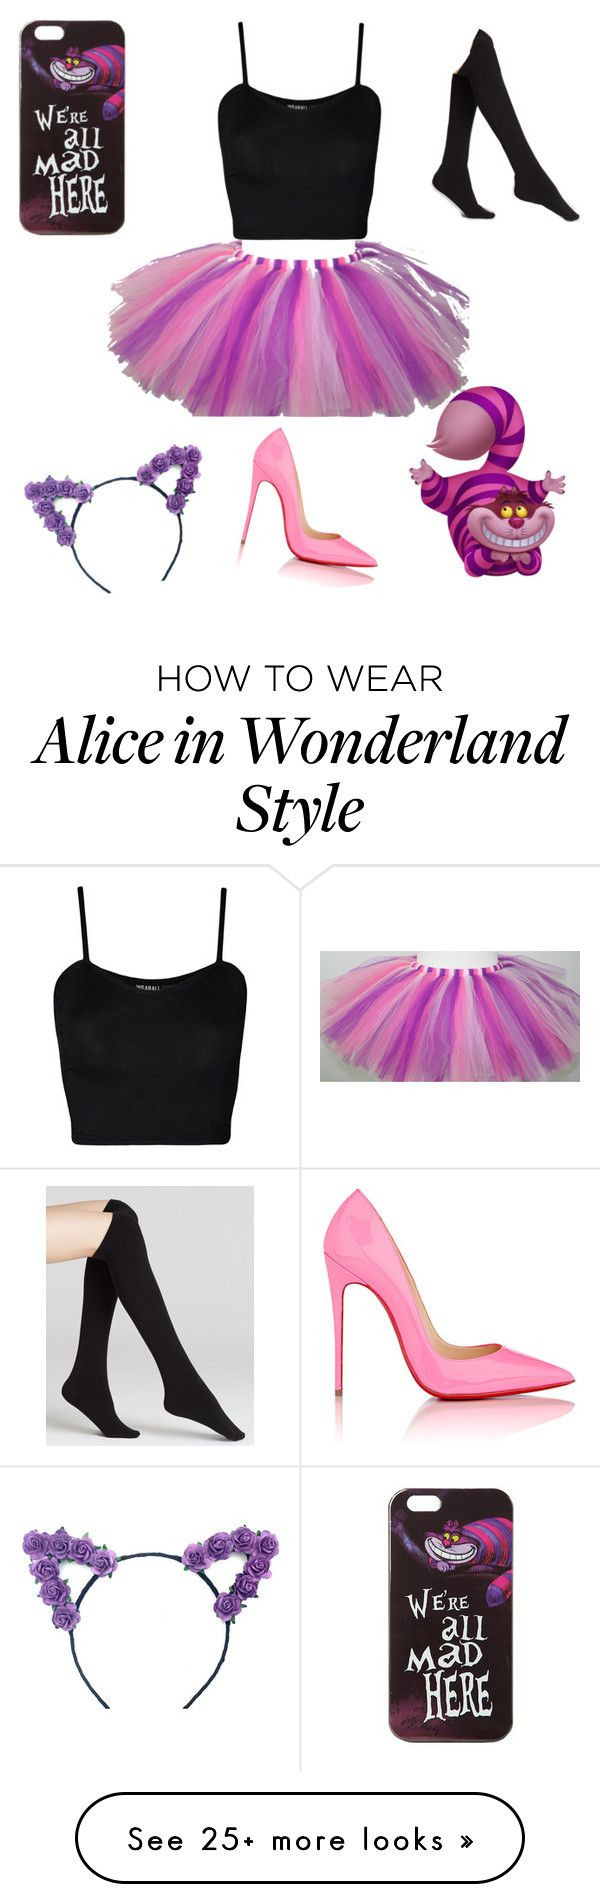 Cheshire Cat DIY Costume
 "Cheshire Cat Costume" by mizaelp on Polyvore featuring